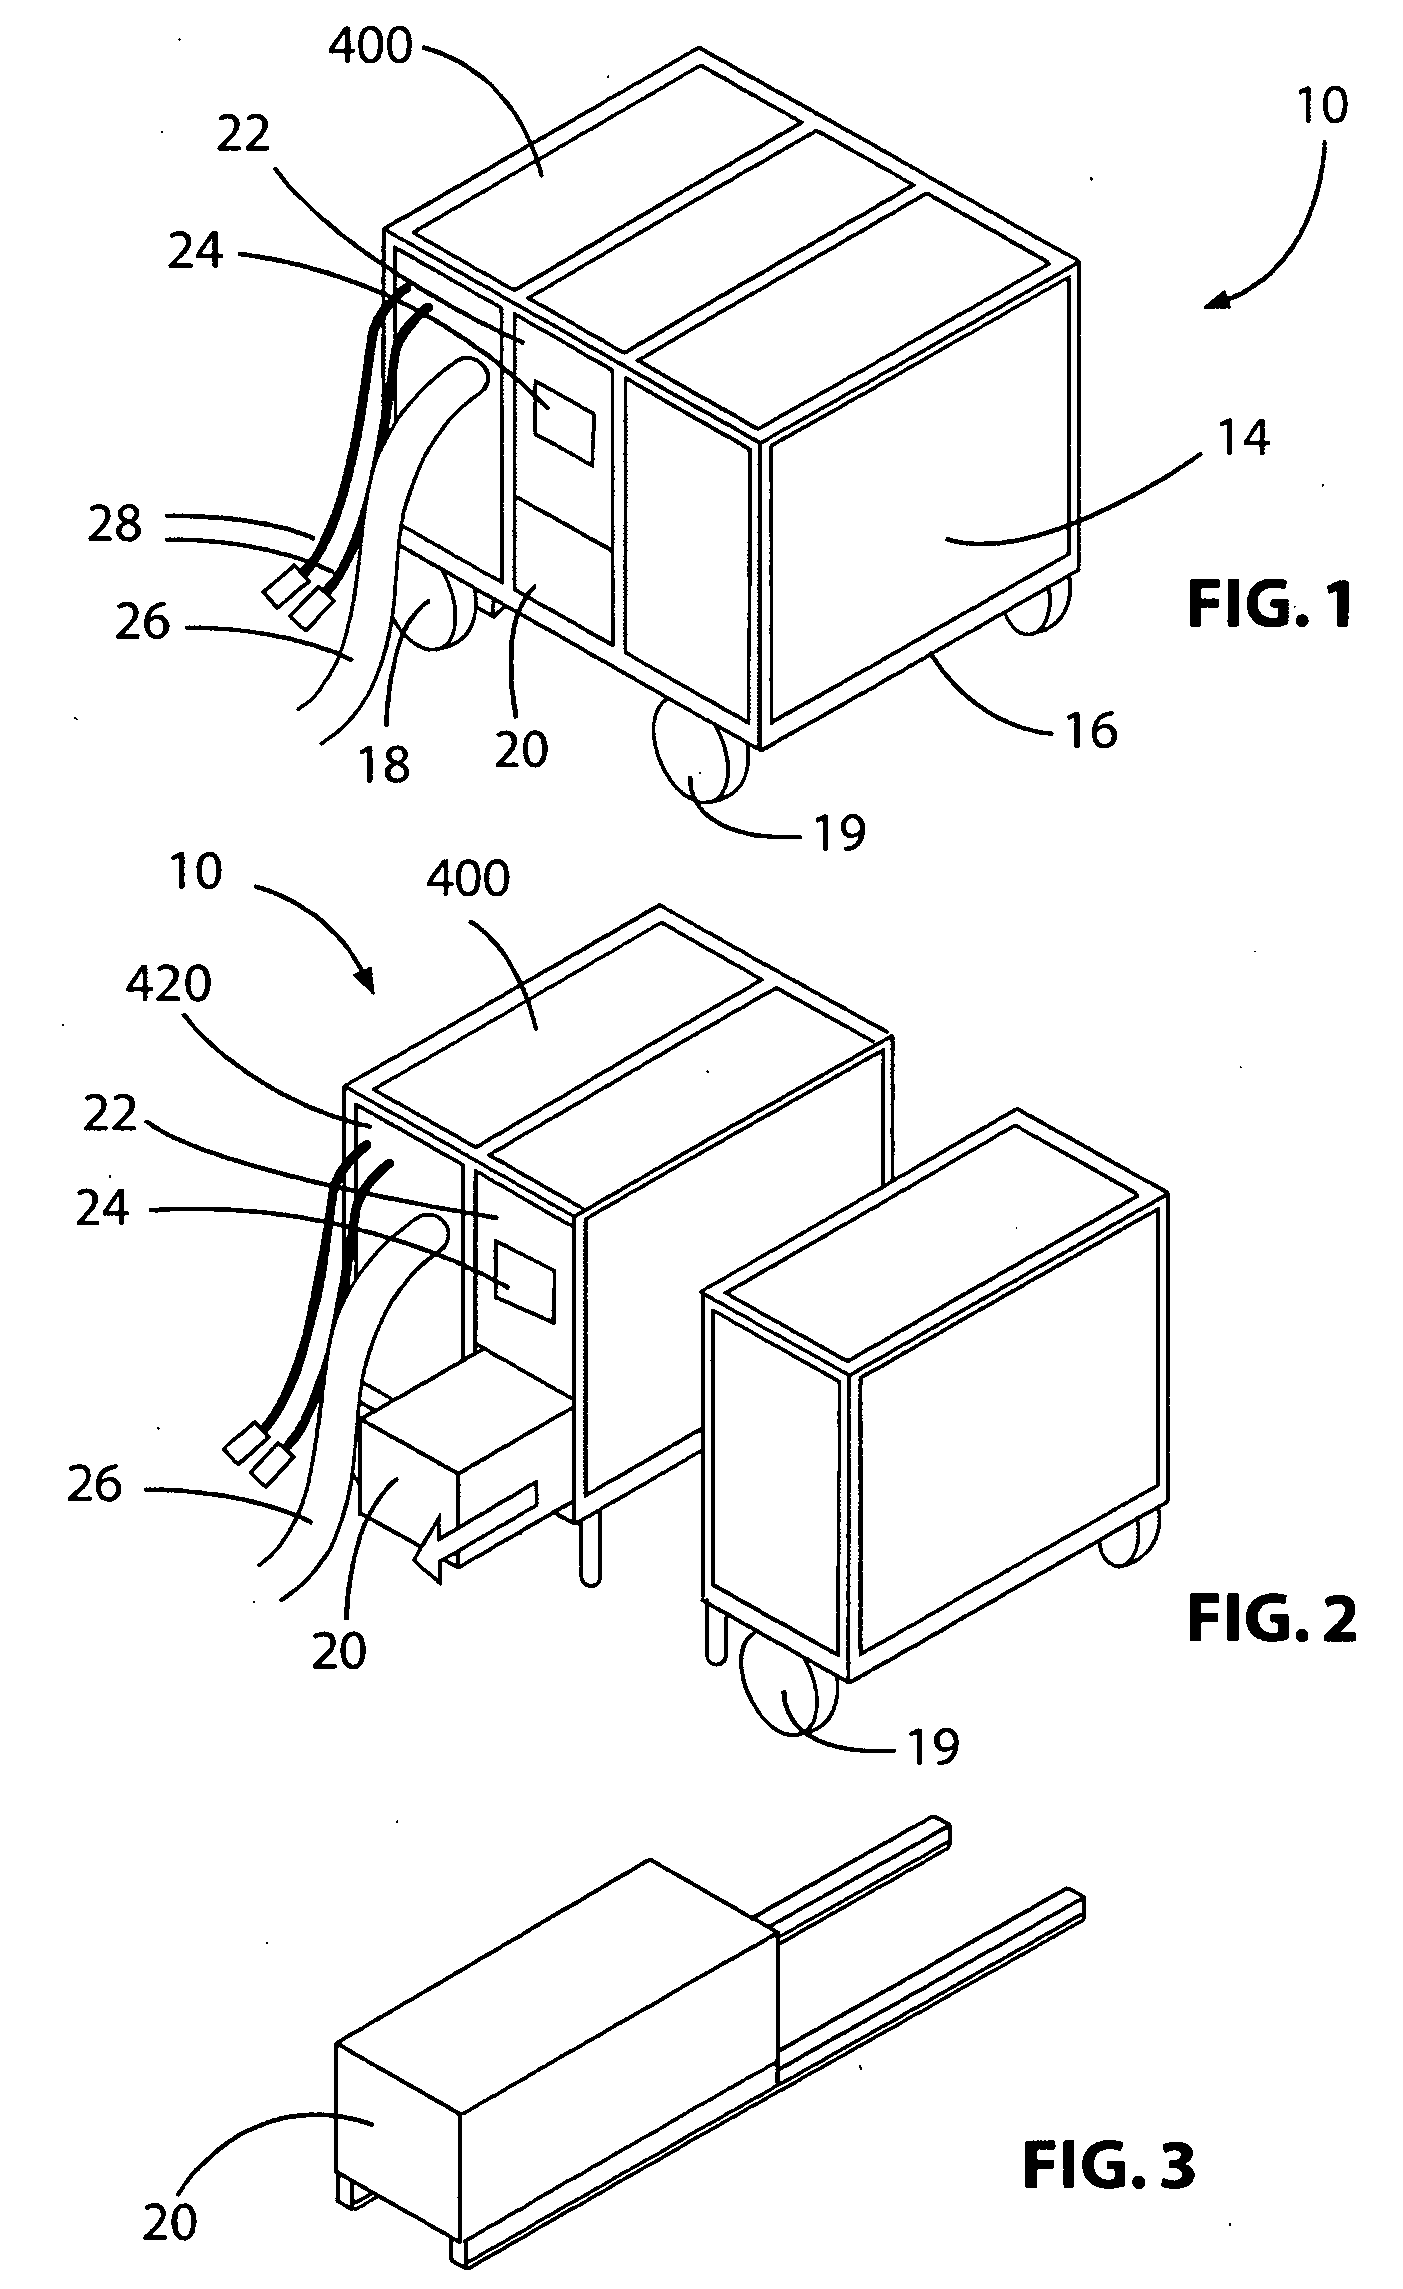 Compact, modularized air conditioning system that can be mounted upon an airplane ground support equipment cart